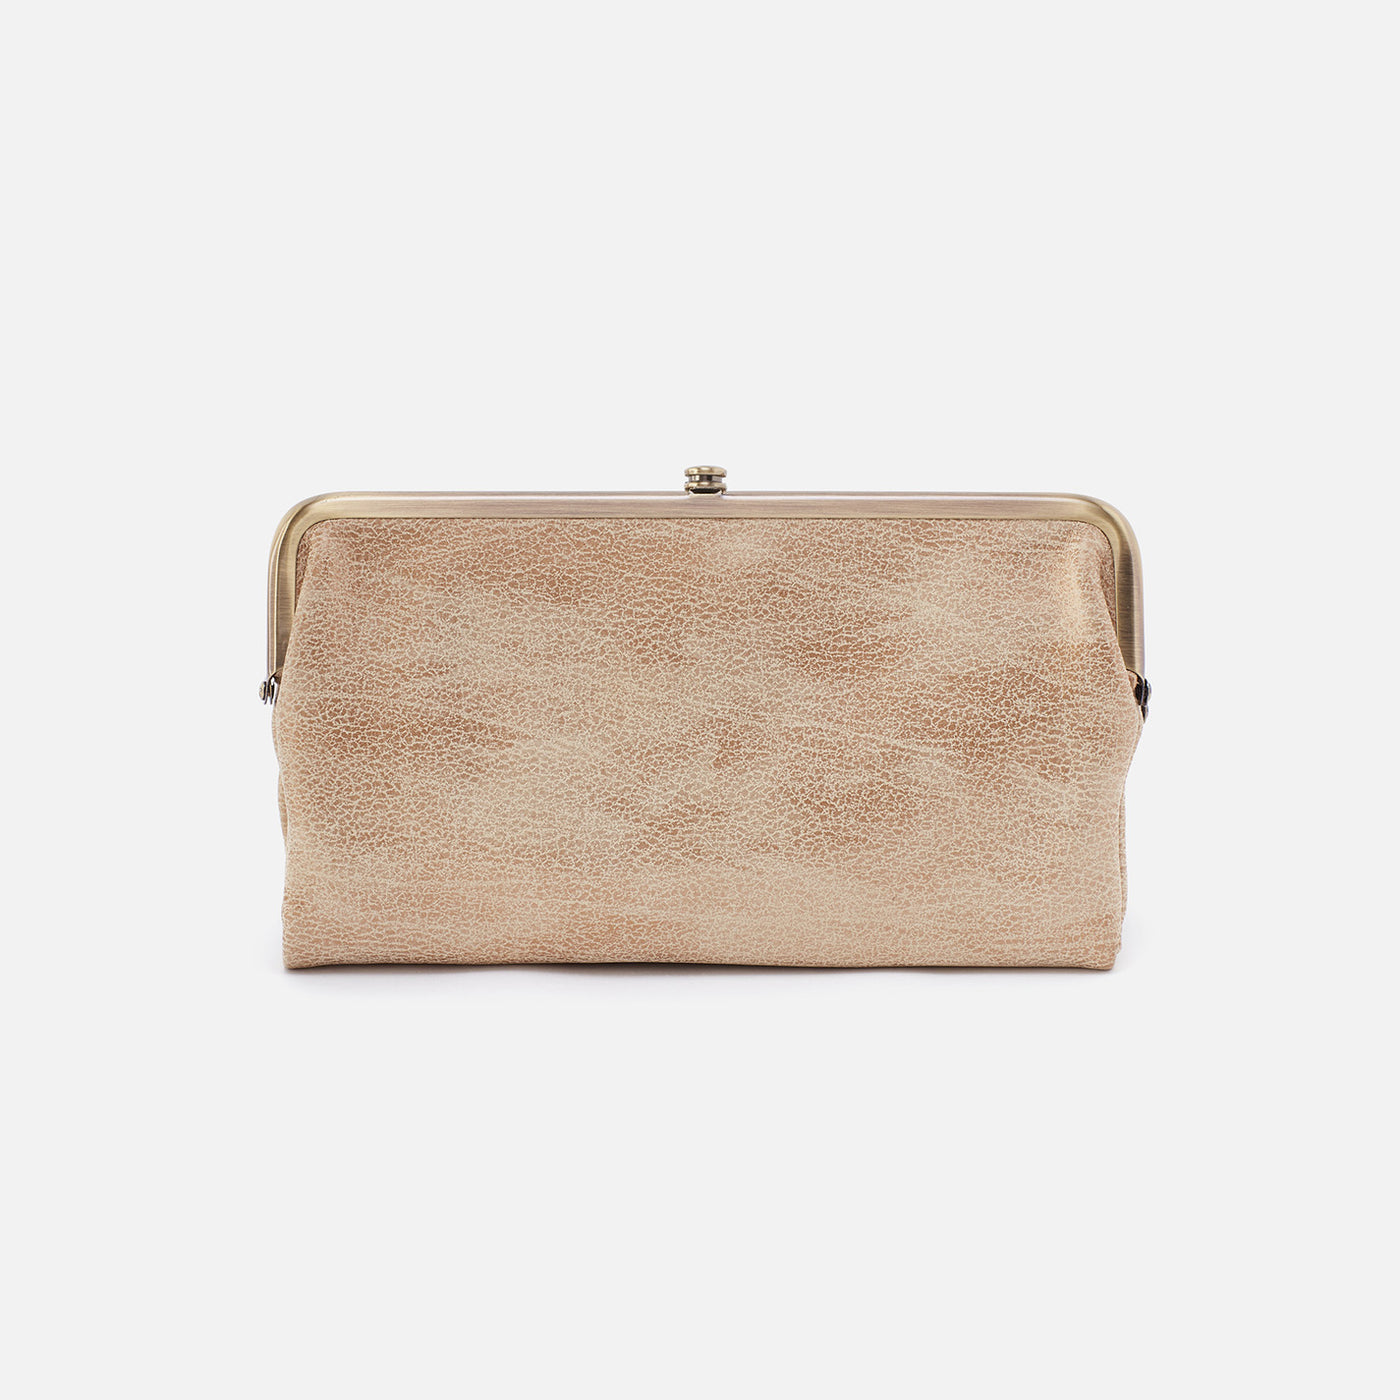 Hobo Kiss Lock Taupe Wallet